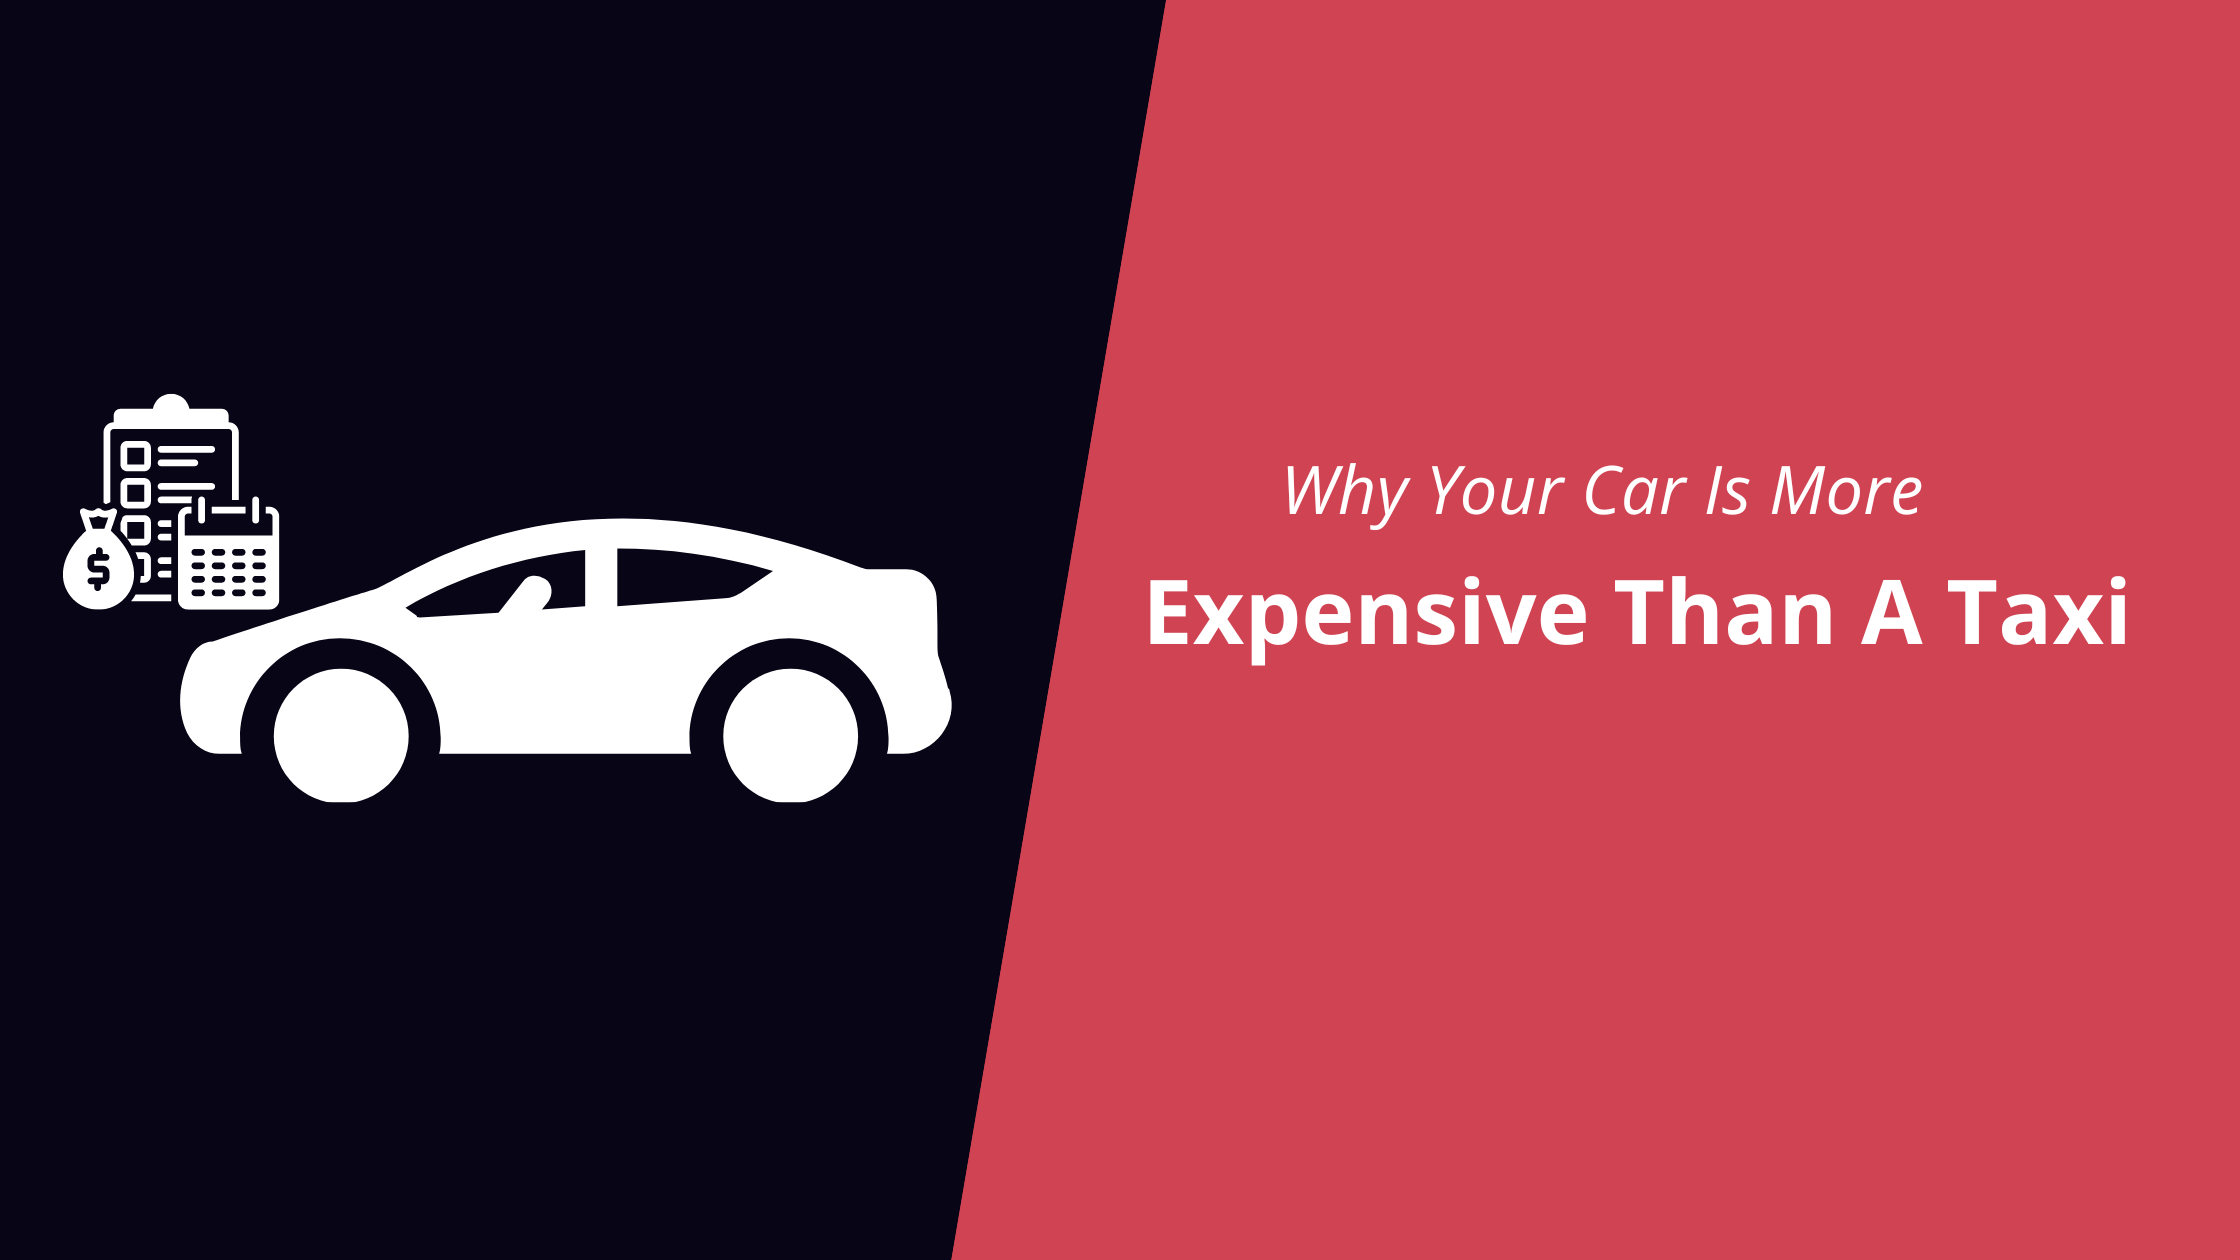 Why Your Car Is More Expensive Than A Taxi